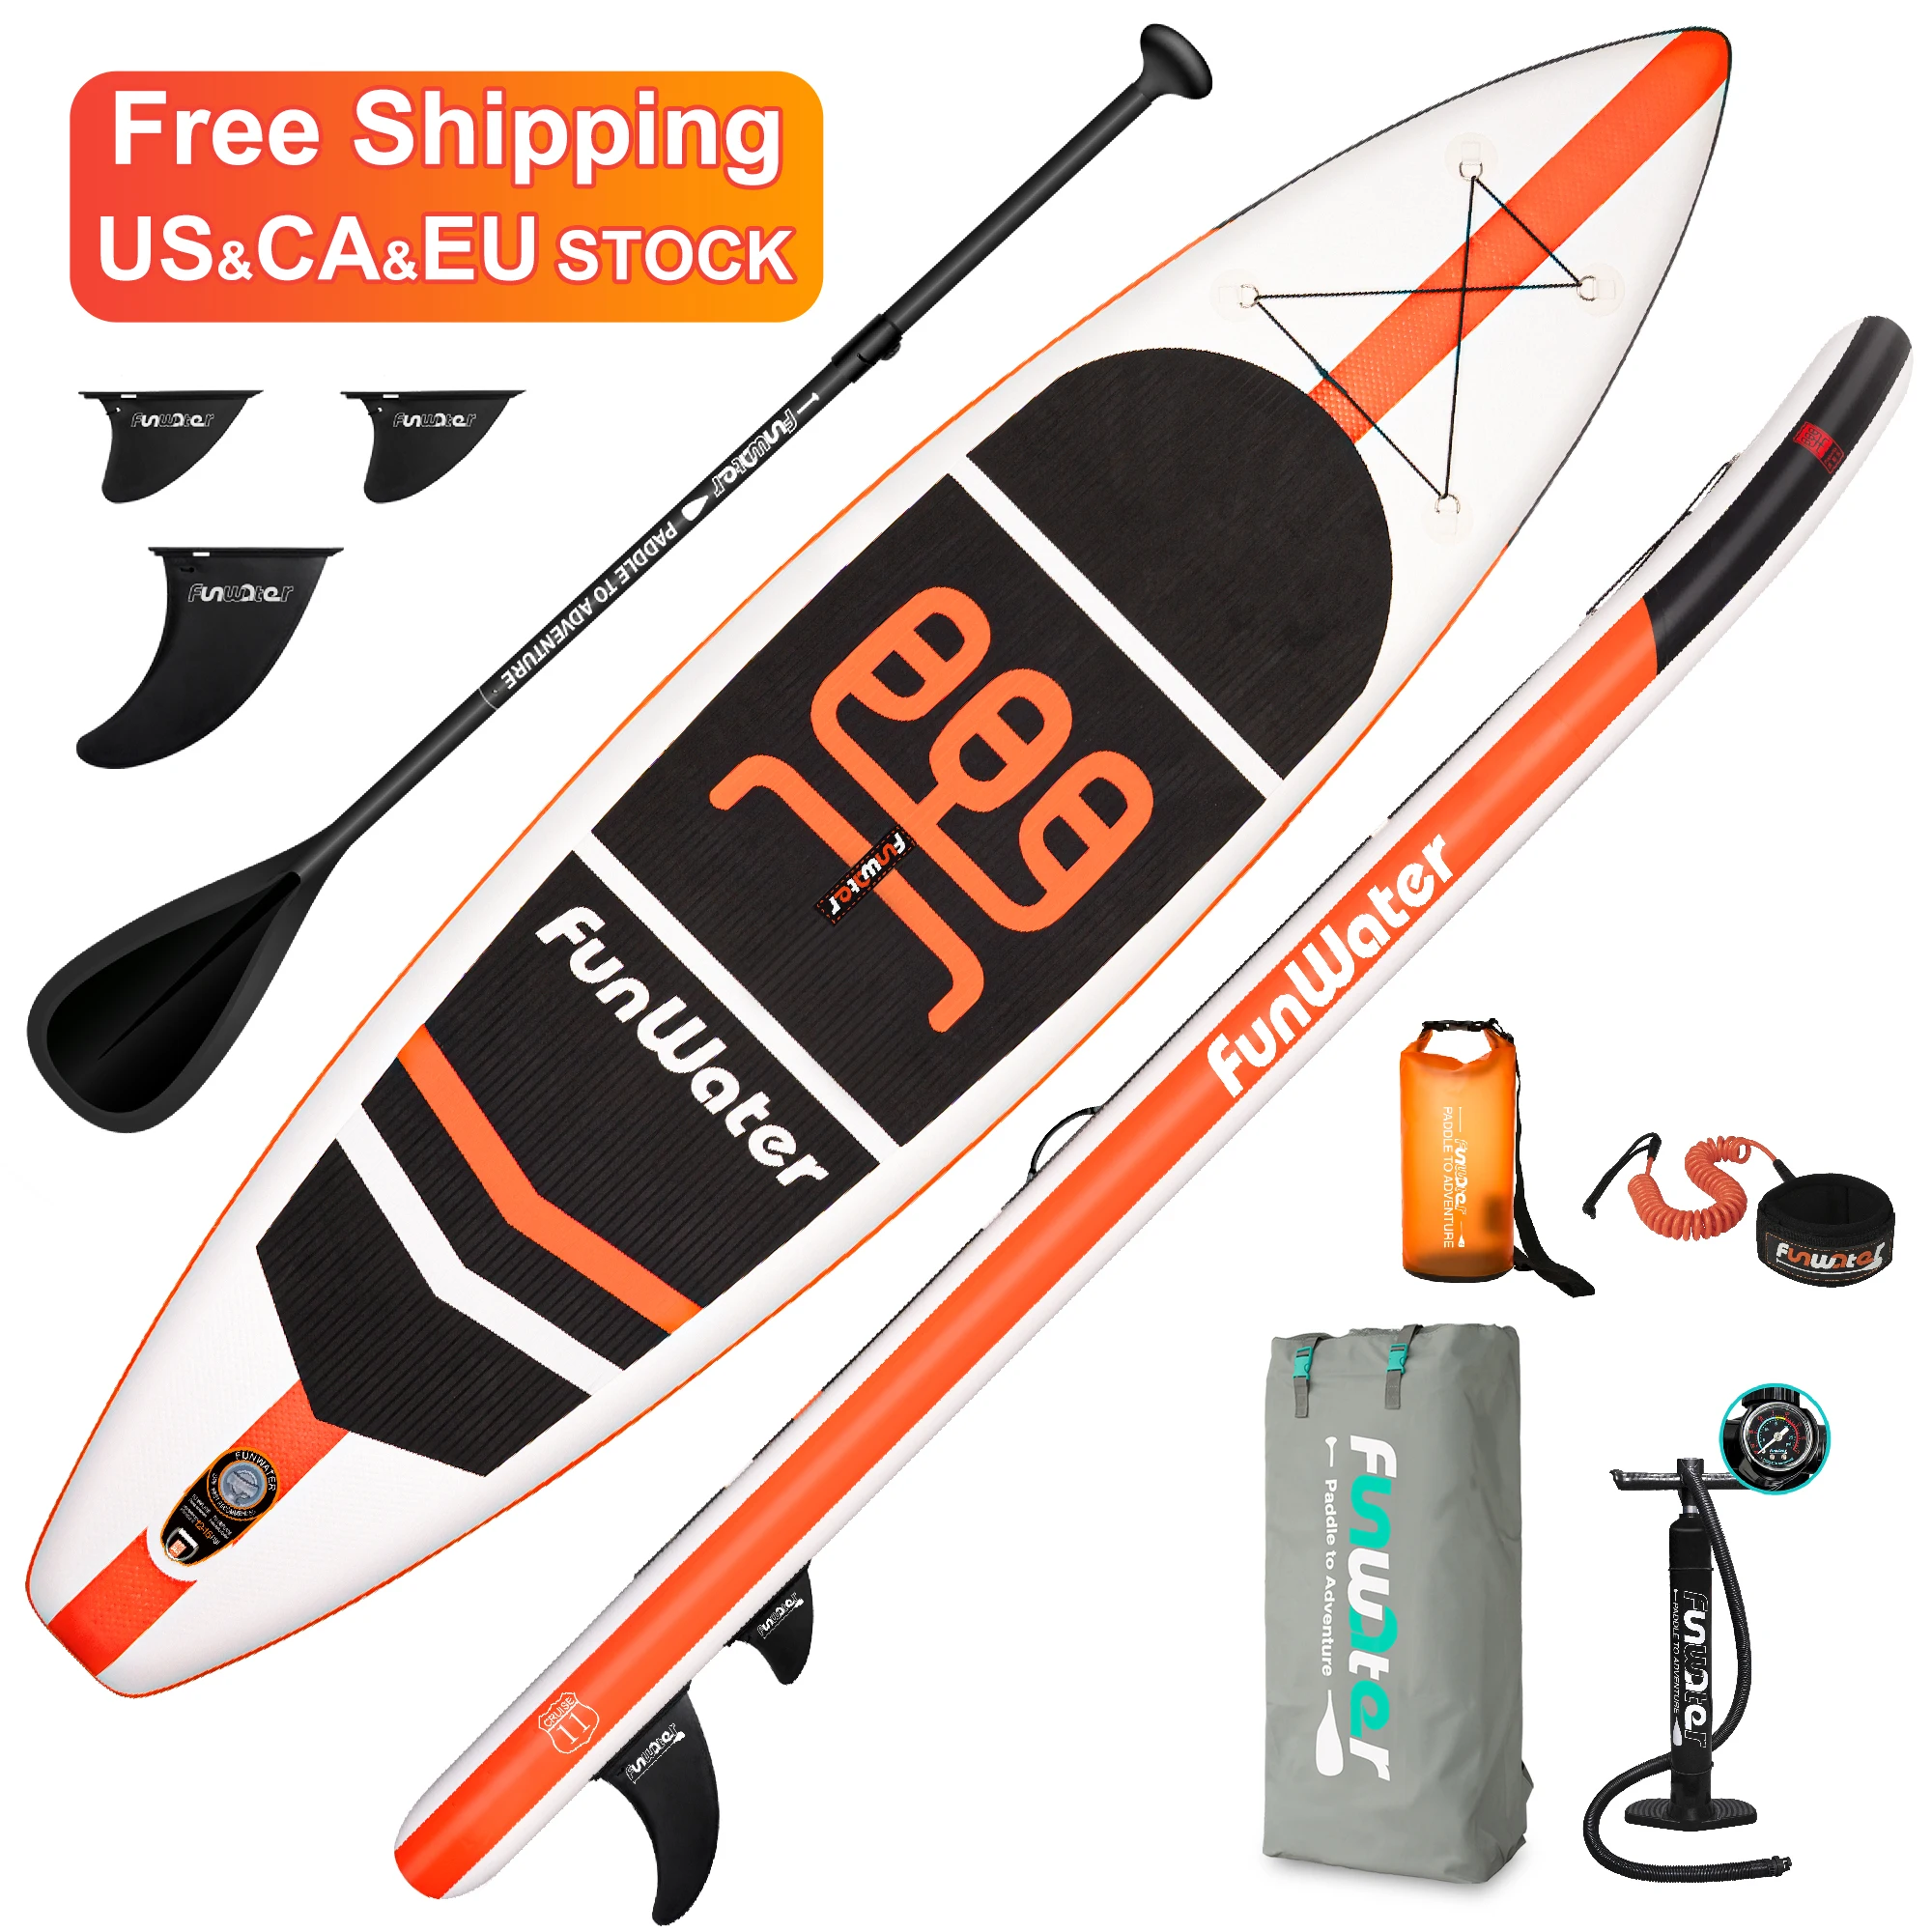 

FUNWATER Free Shipping Dropshipping OEM 11' manufacturer surfing inflatable funwat paddle board sup wakeboard board paddle, Orange